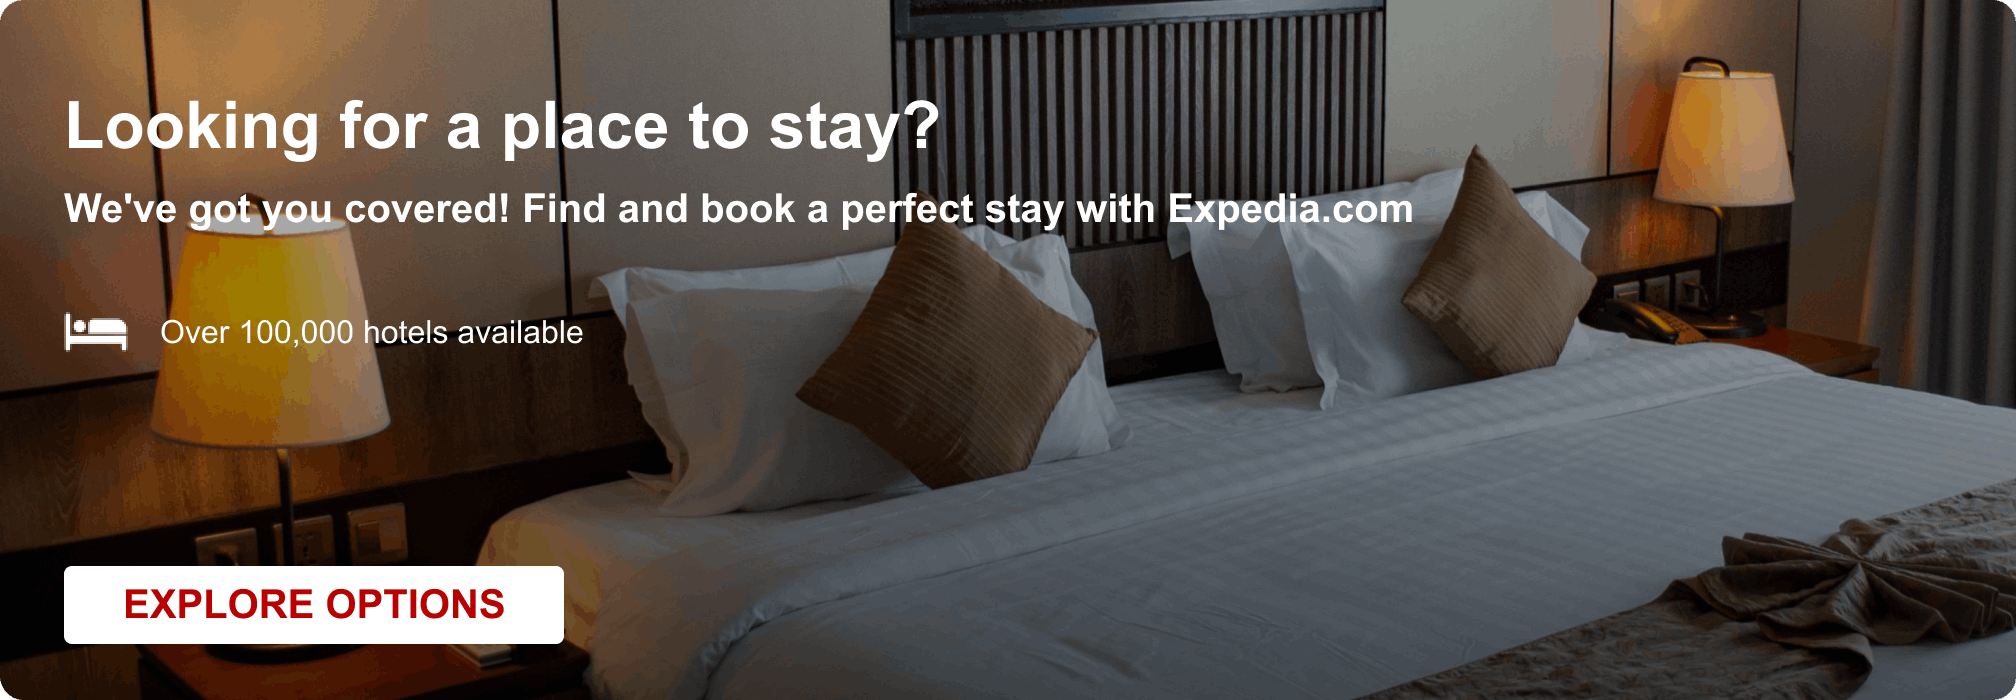 Expedia Banner